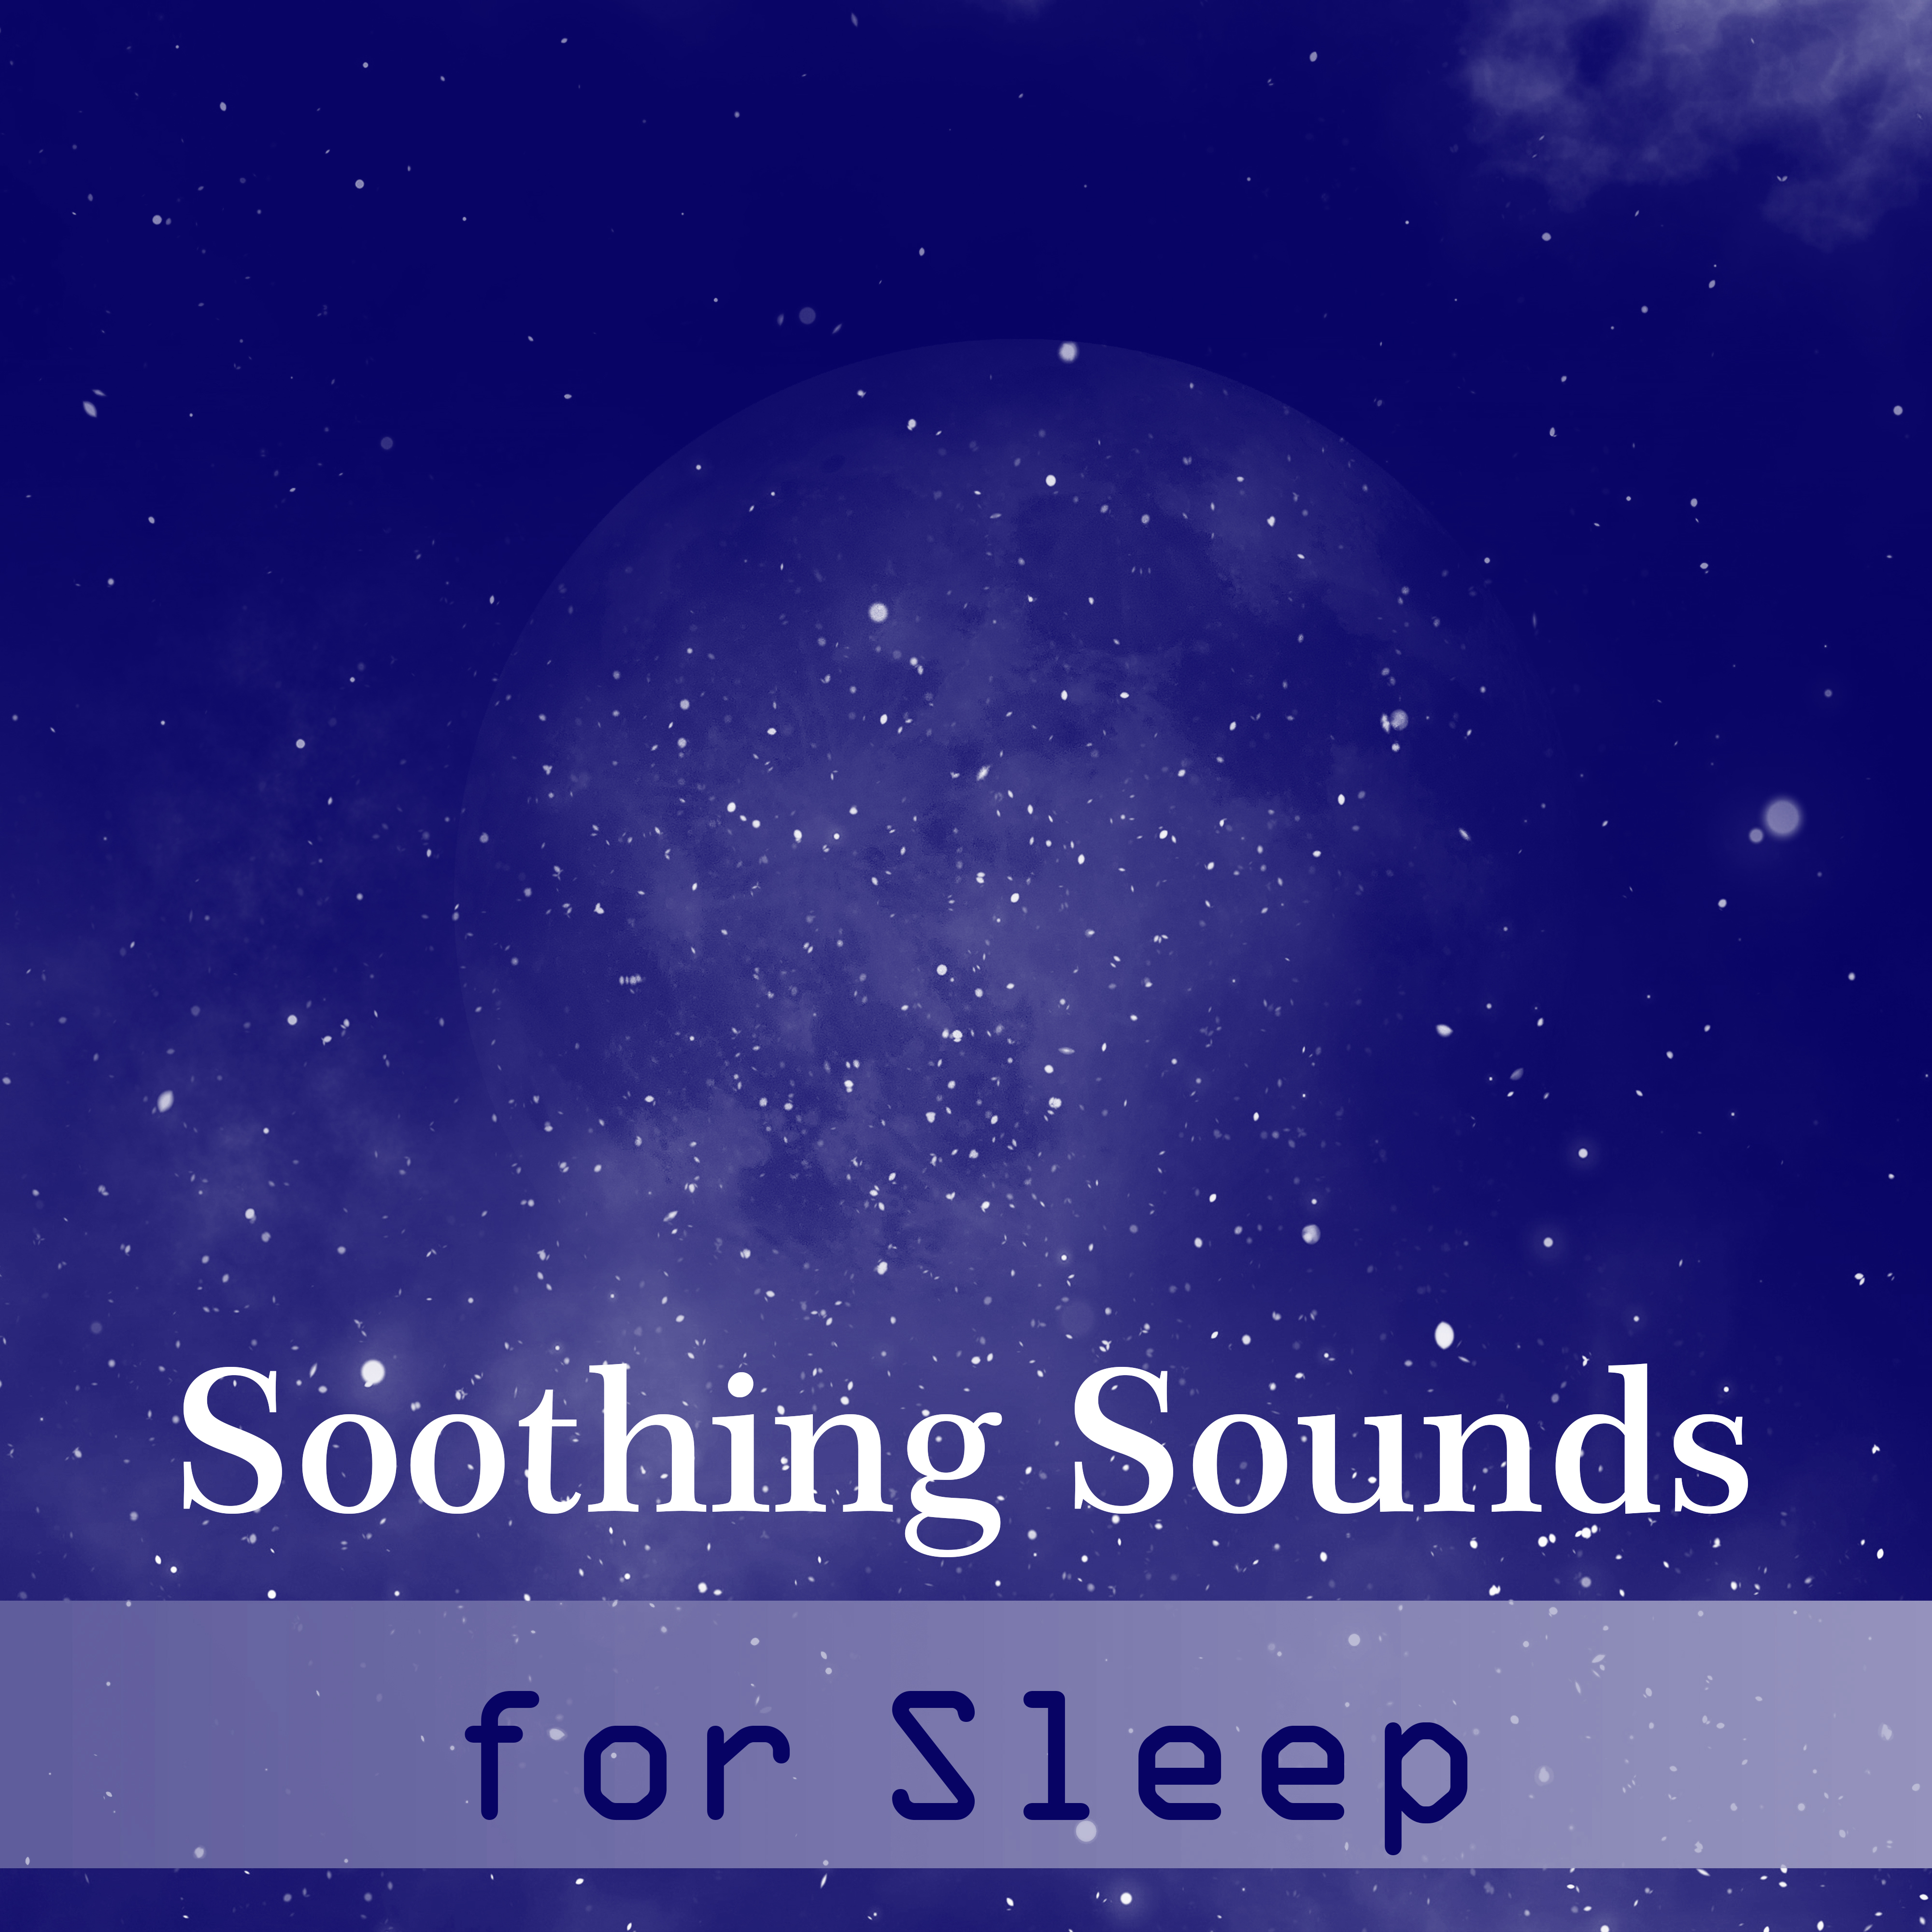 Soothing Sounds for Sleep – Healing Music at Goodnight, Pure Mind, Relaxing Dream, Gentle Lullaby, Deep Relief, Calm Nap